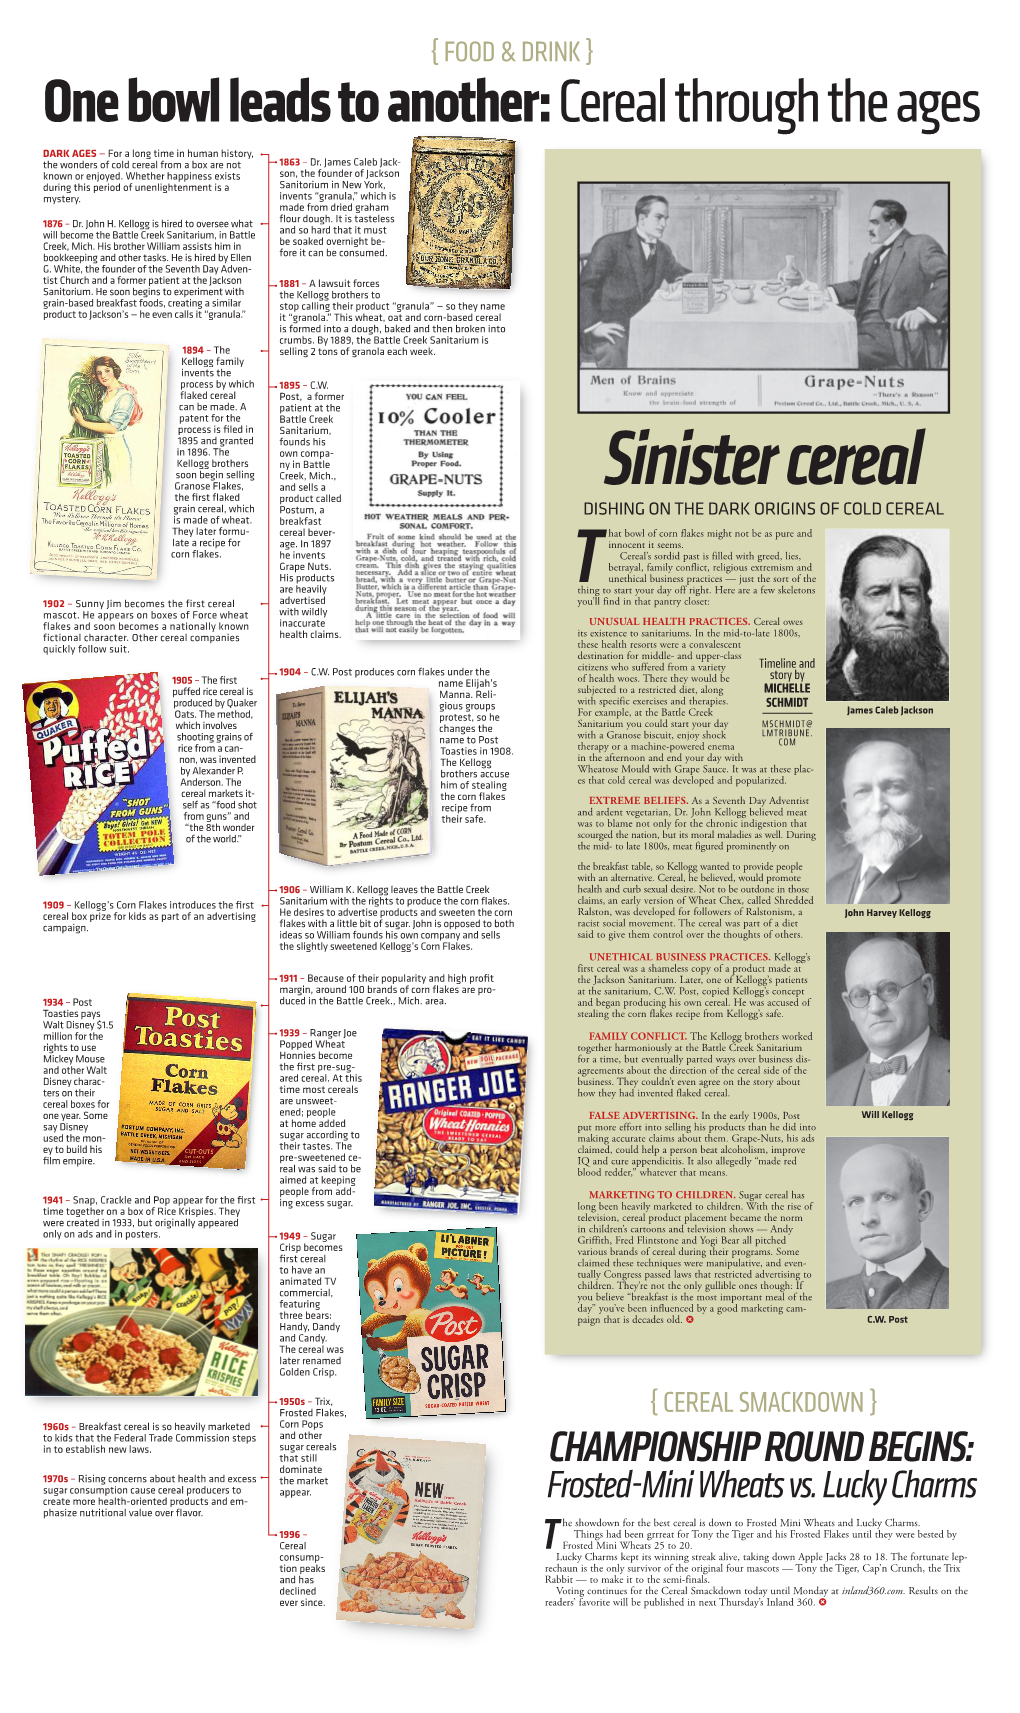 Cereal Through the Ages DARK AGES — for a Long Time in Human History, the Wonders of Cold Cereal from a Box Are Not 1863 – Dr